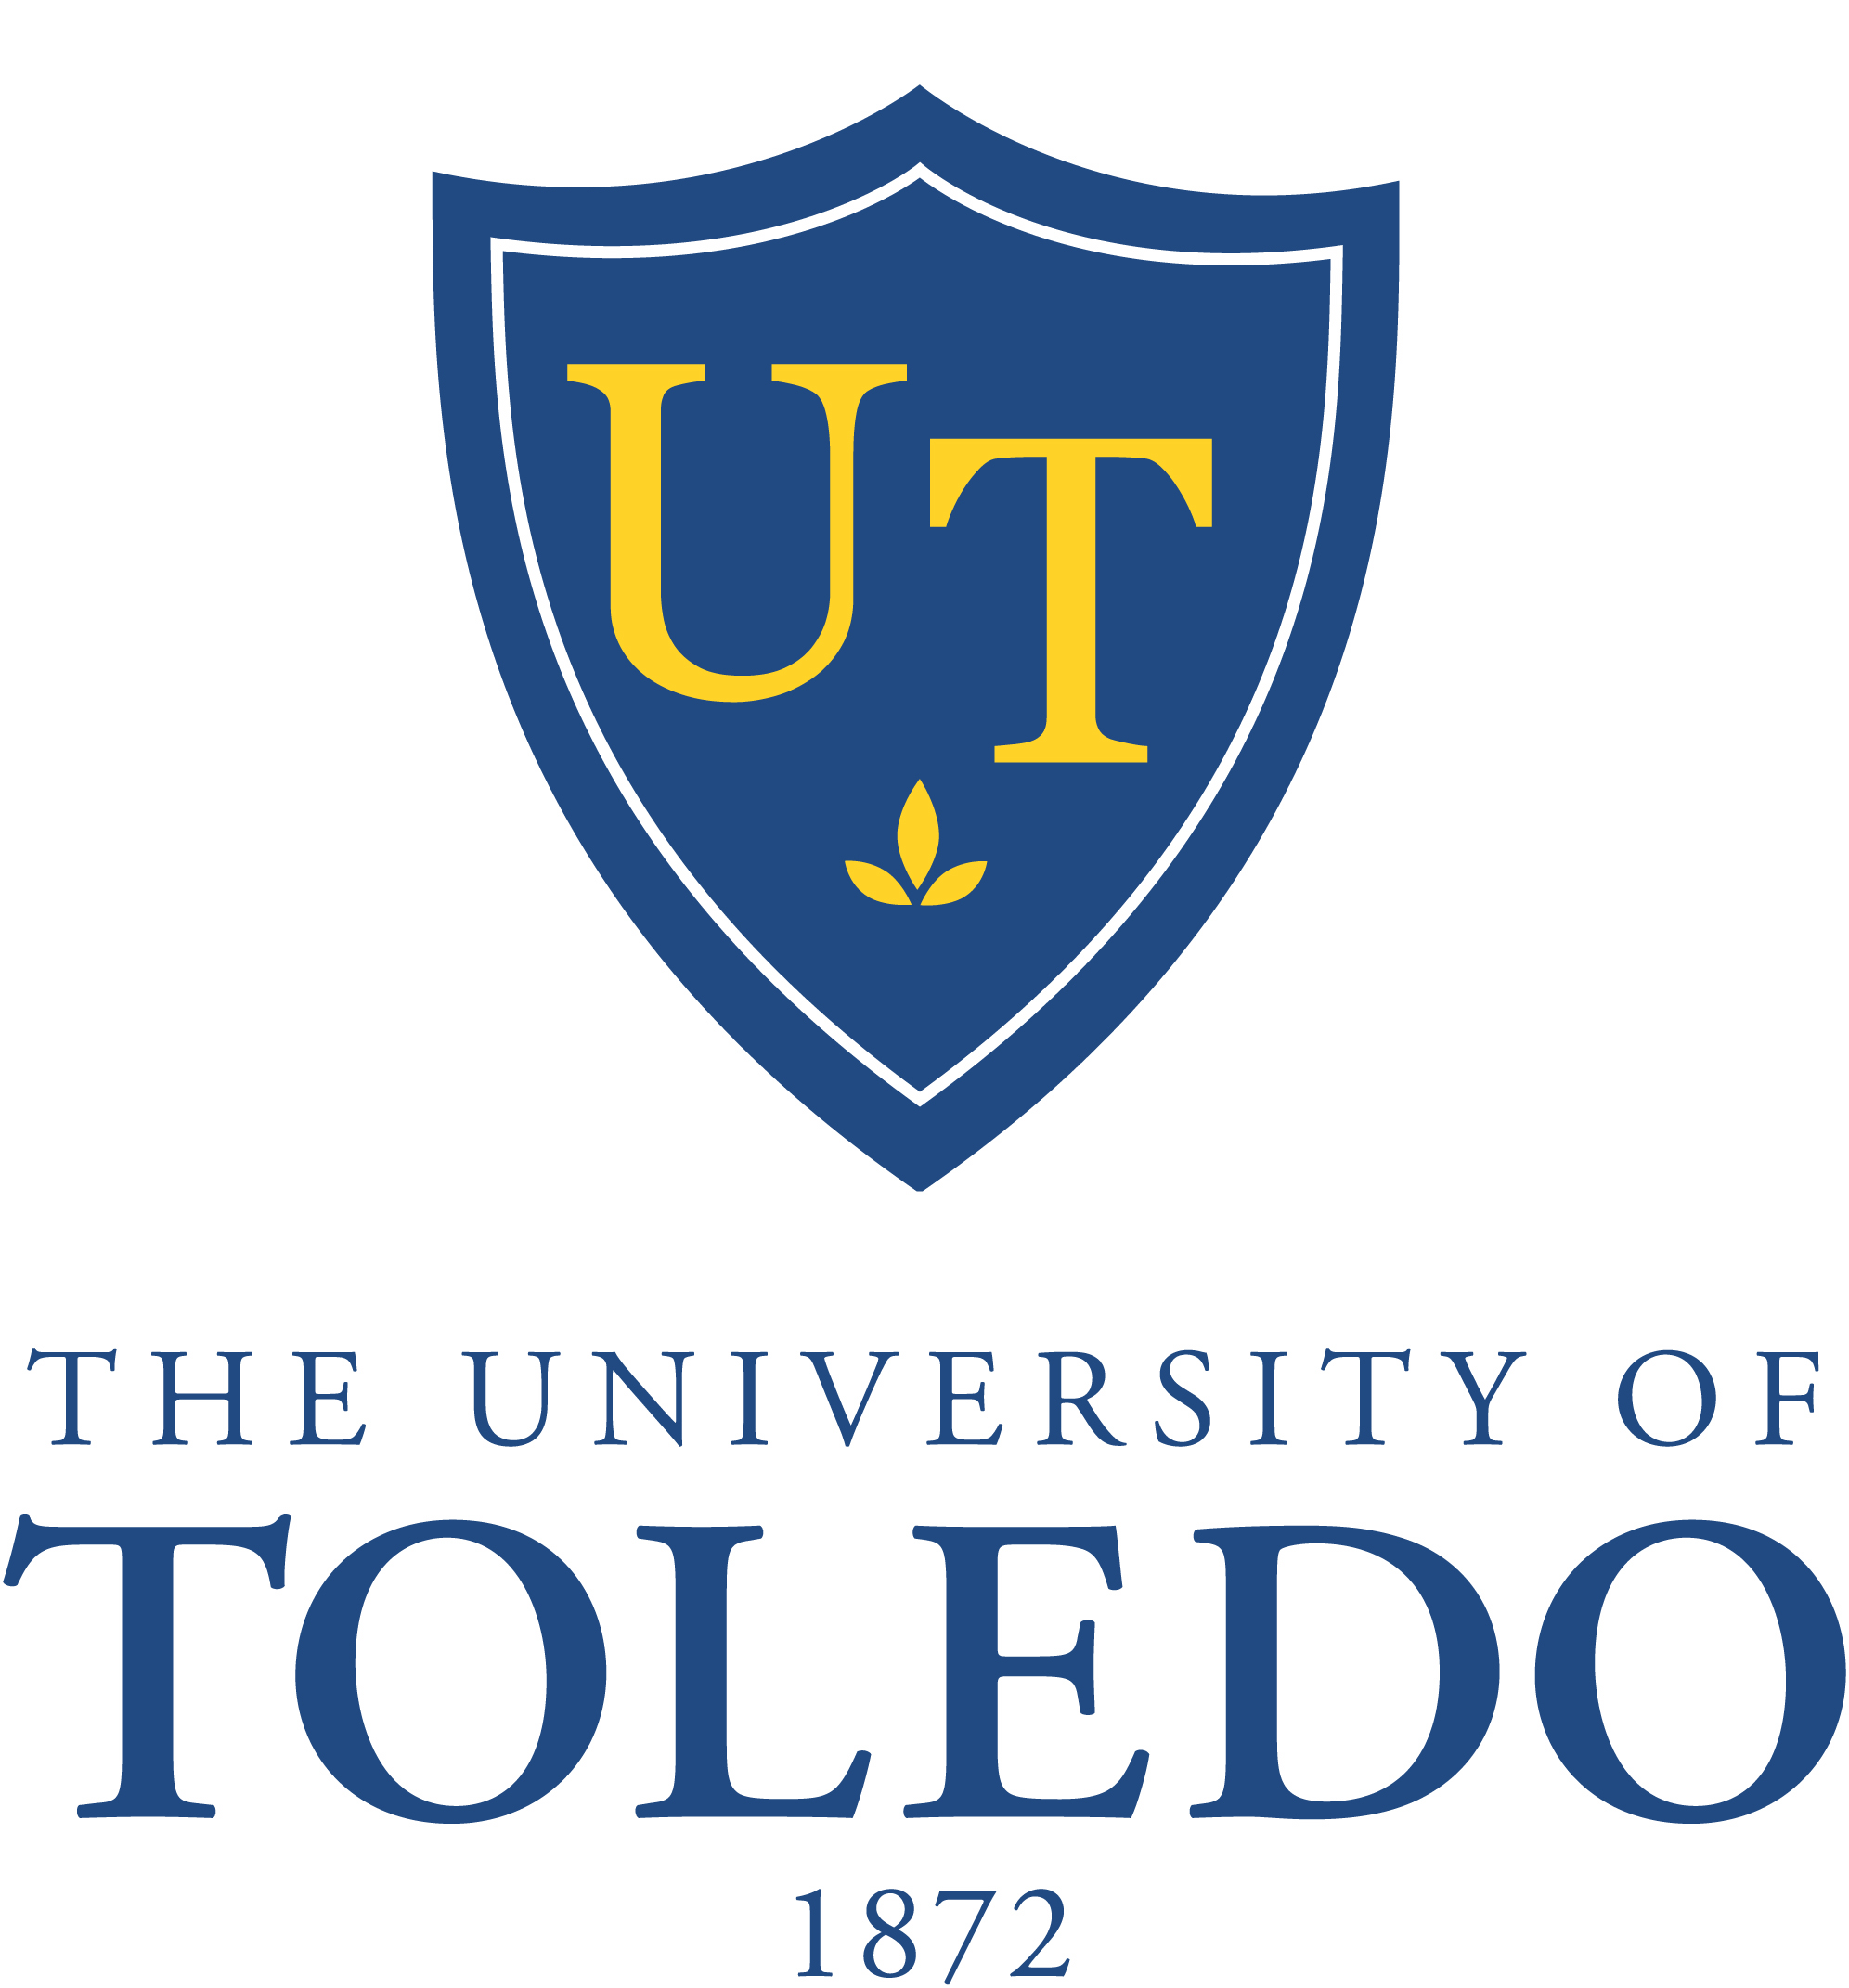 The University of Toledo created the CCSIES (Community College Student Internationalization Experience Survey) to explore the relationship between student involvement in international programs, services, and classroom practices and key student outcomes.  